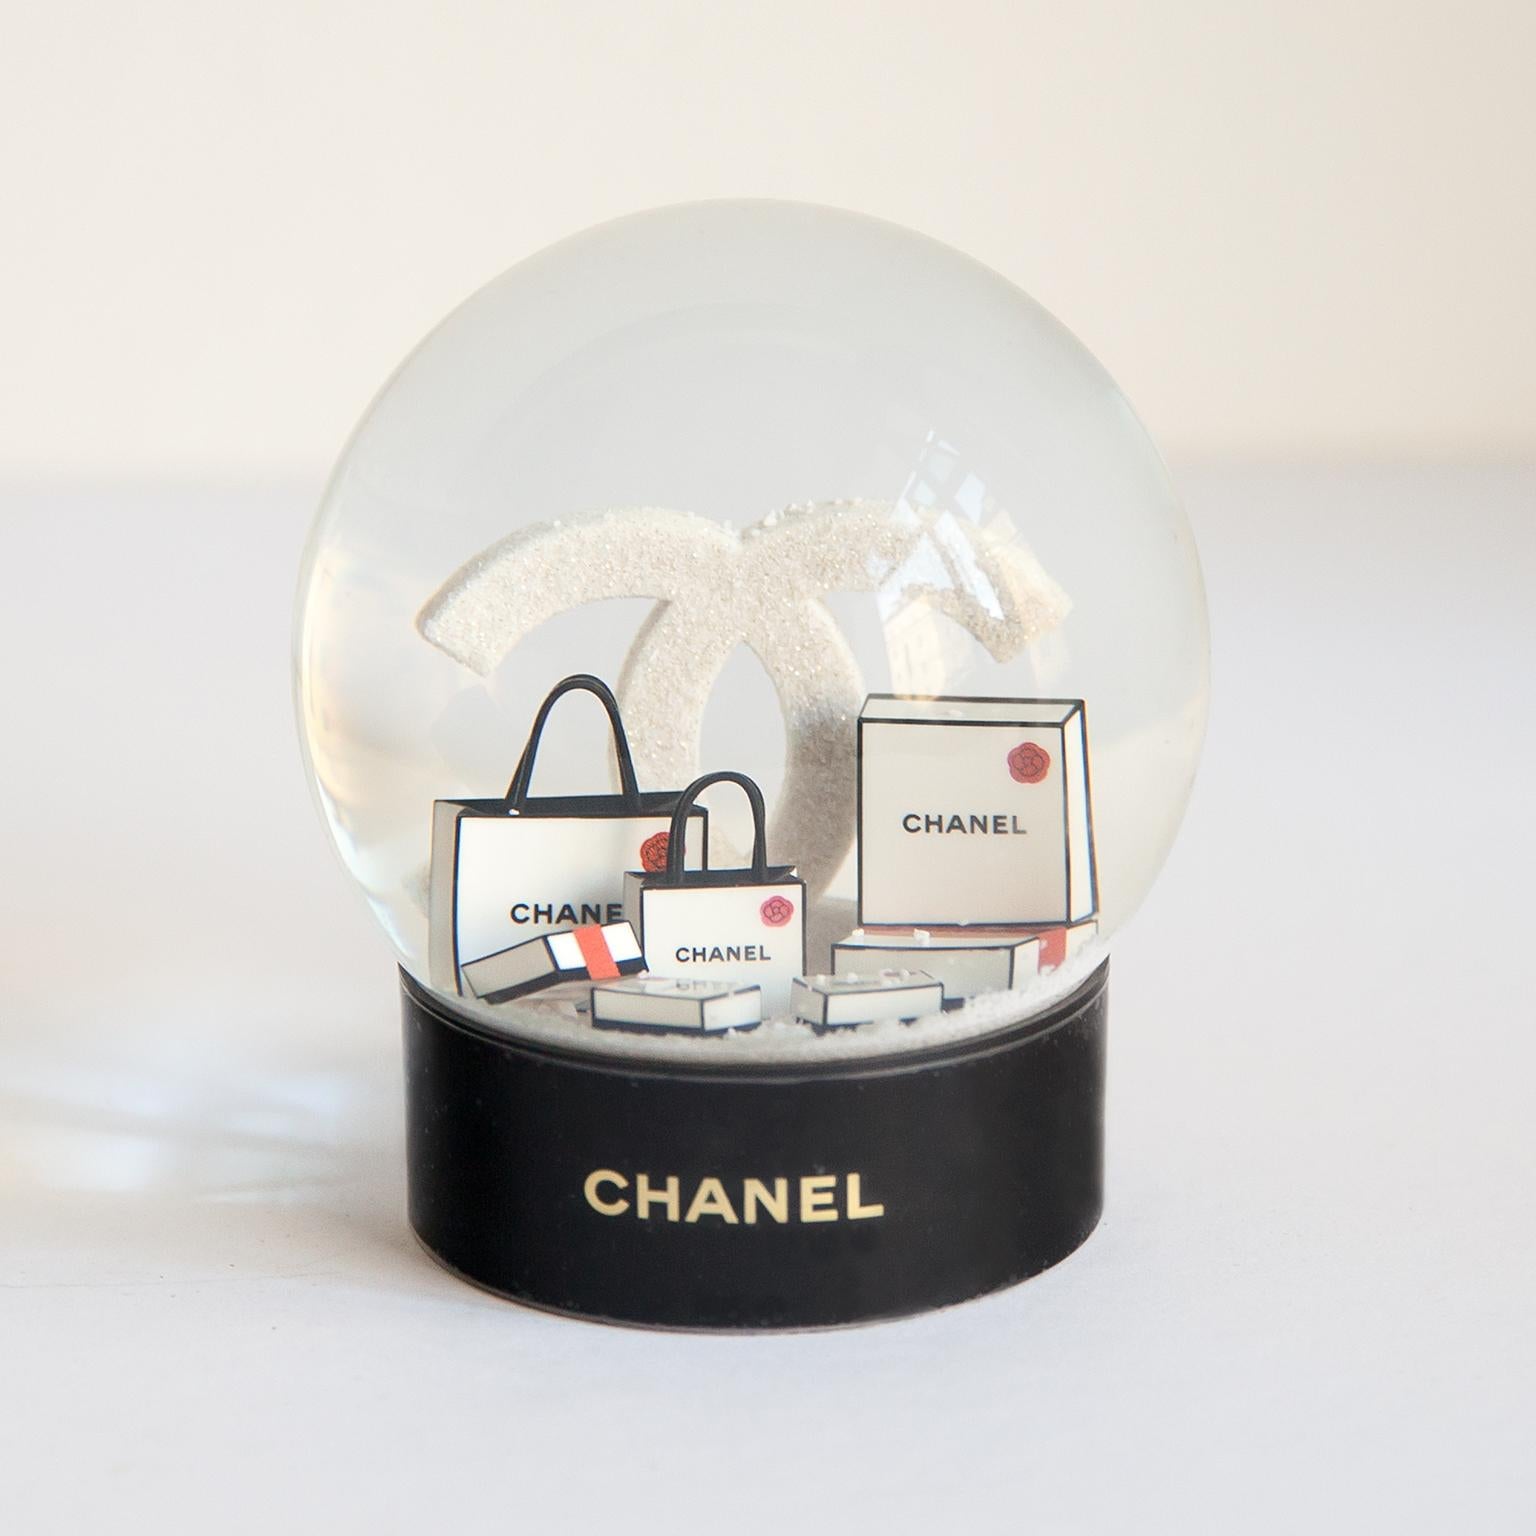 Rare limited edition of a Chanel Snow Ball with white bags on a white base, which are only for VIP Customers in excellent condition and with the original box.

